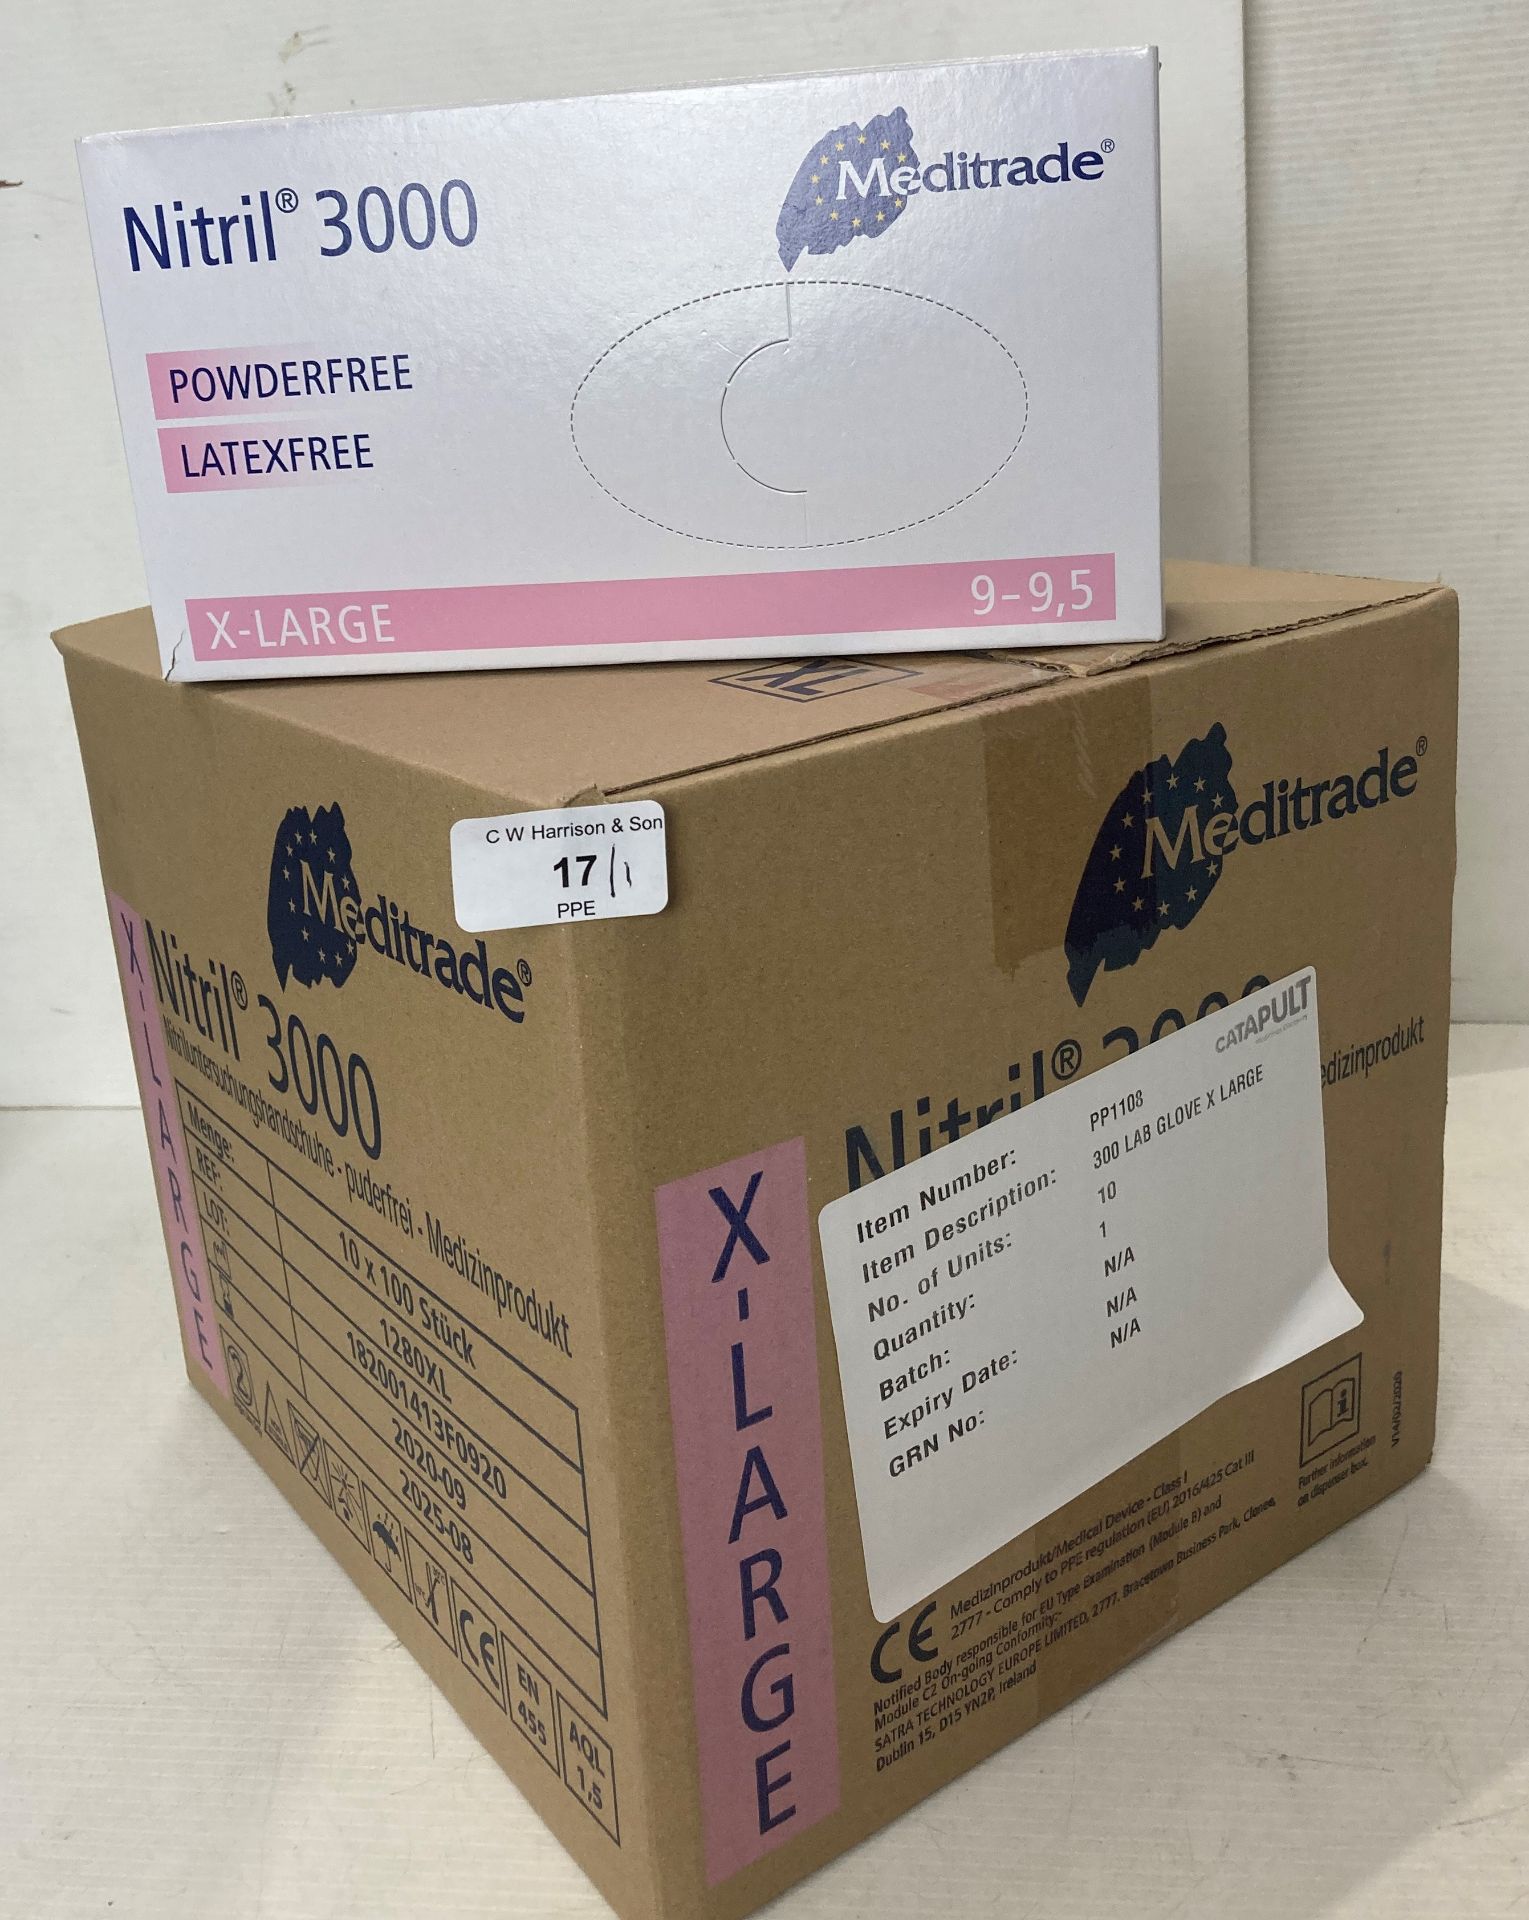 30 boxes of (3 outer boxes) Meditrade Nitrile 3000 LAB gloves - size XL